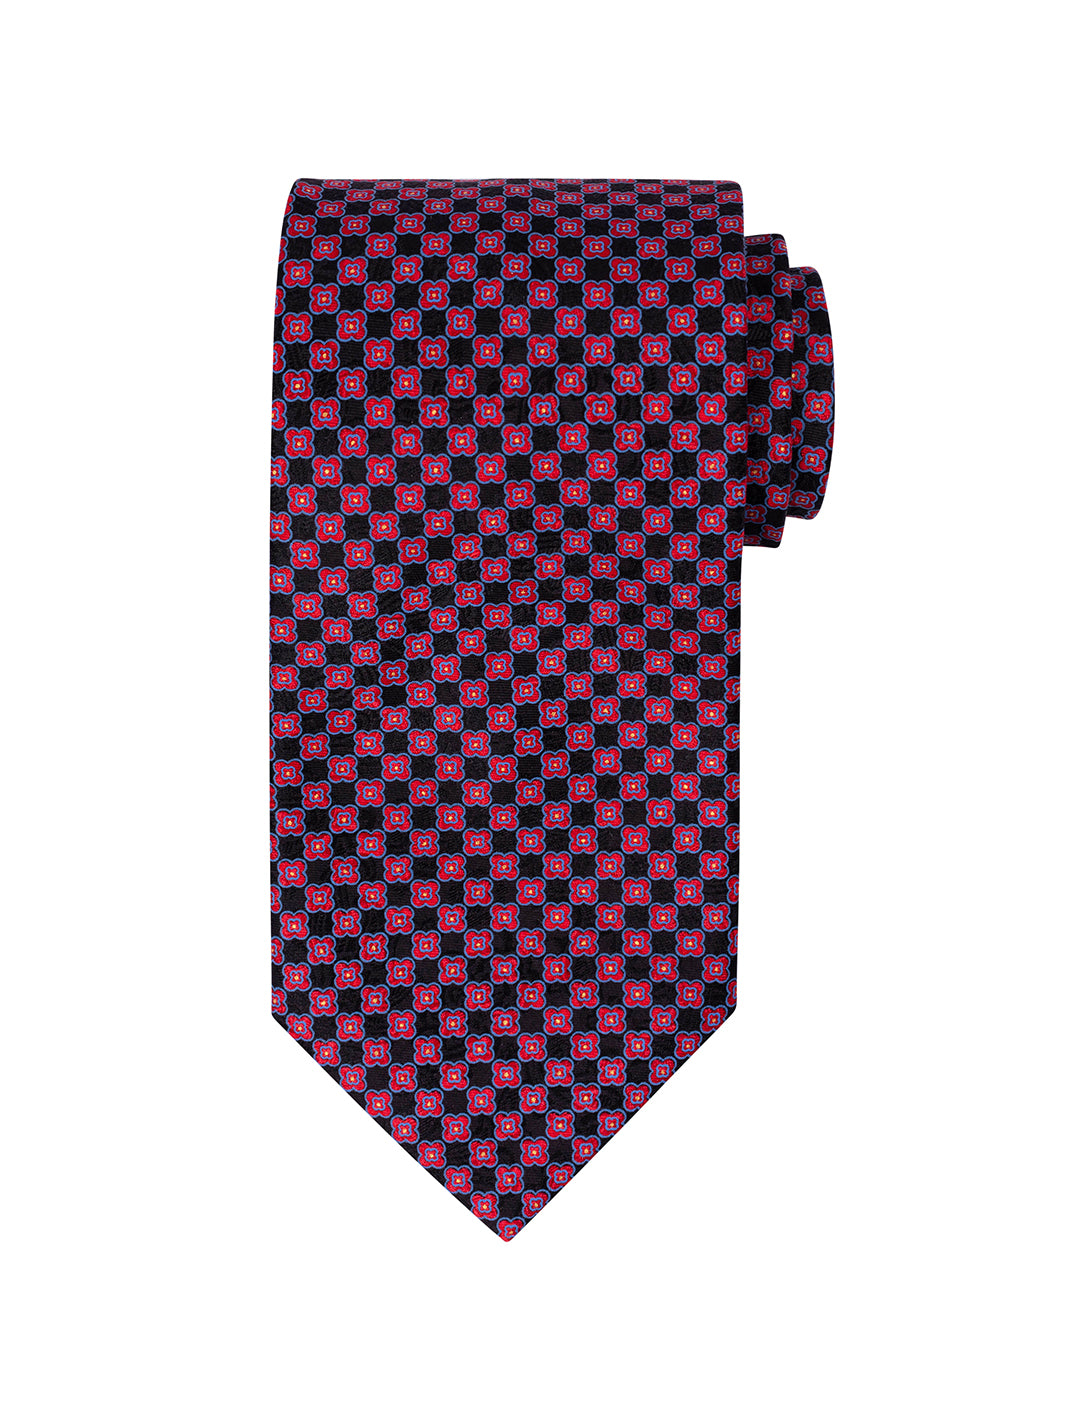 Men's Stefano Ricci Tie - Pink and Black